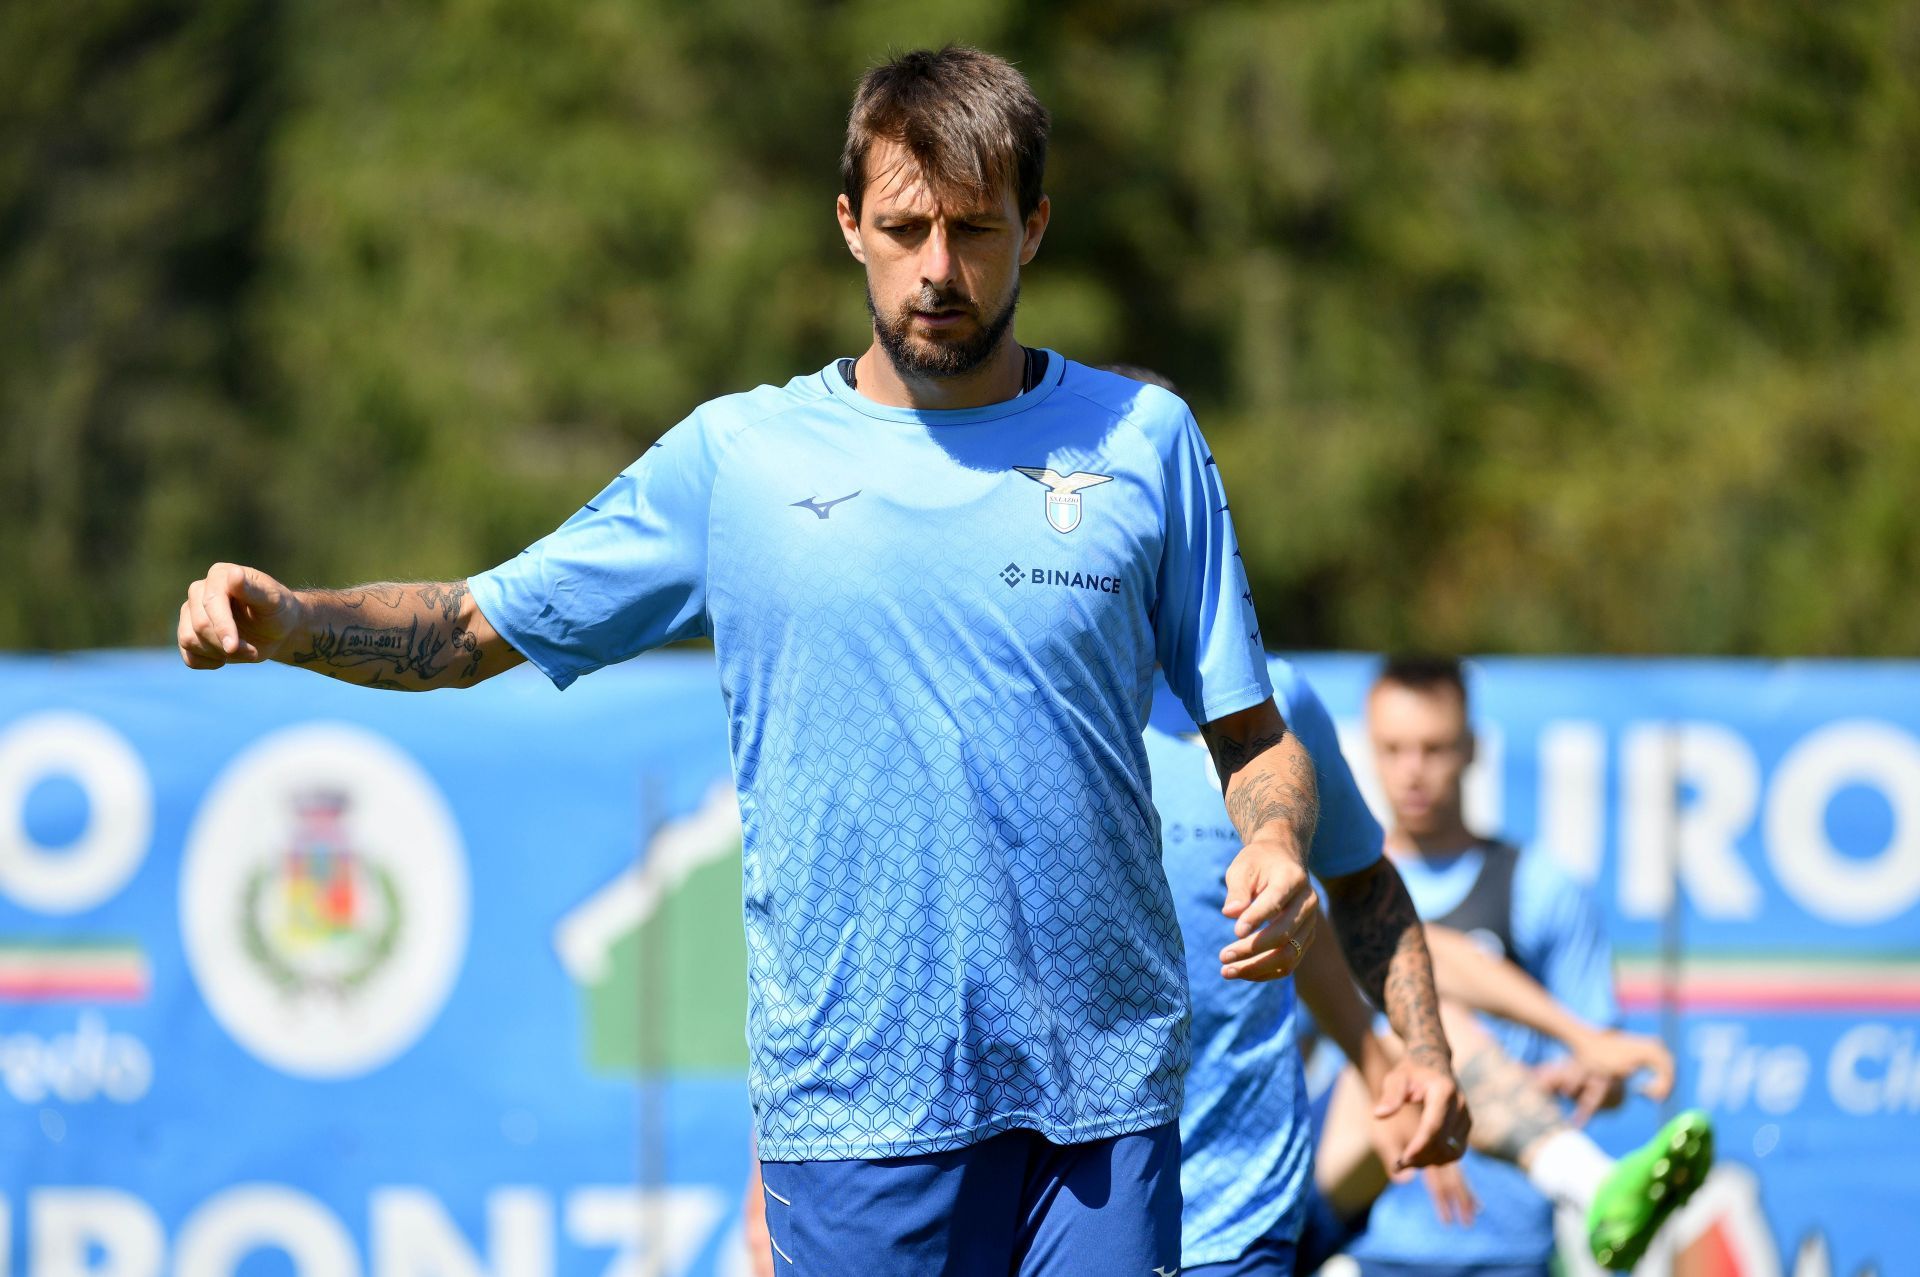 Lazio have a strong squad despite losing Acerbi to Inter on transfer deadline day